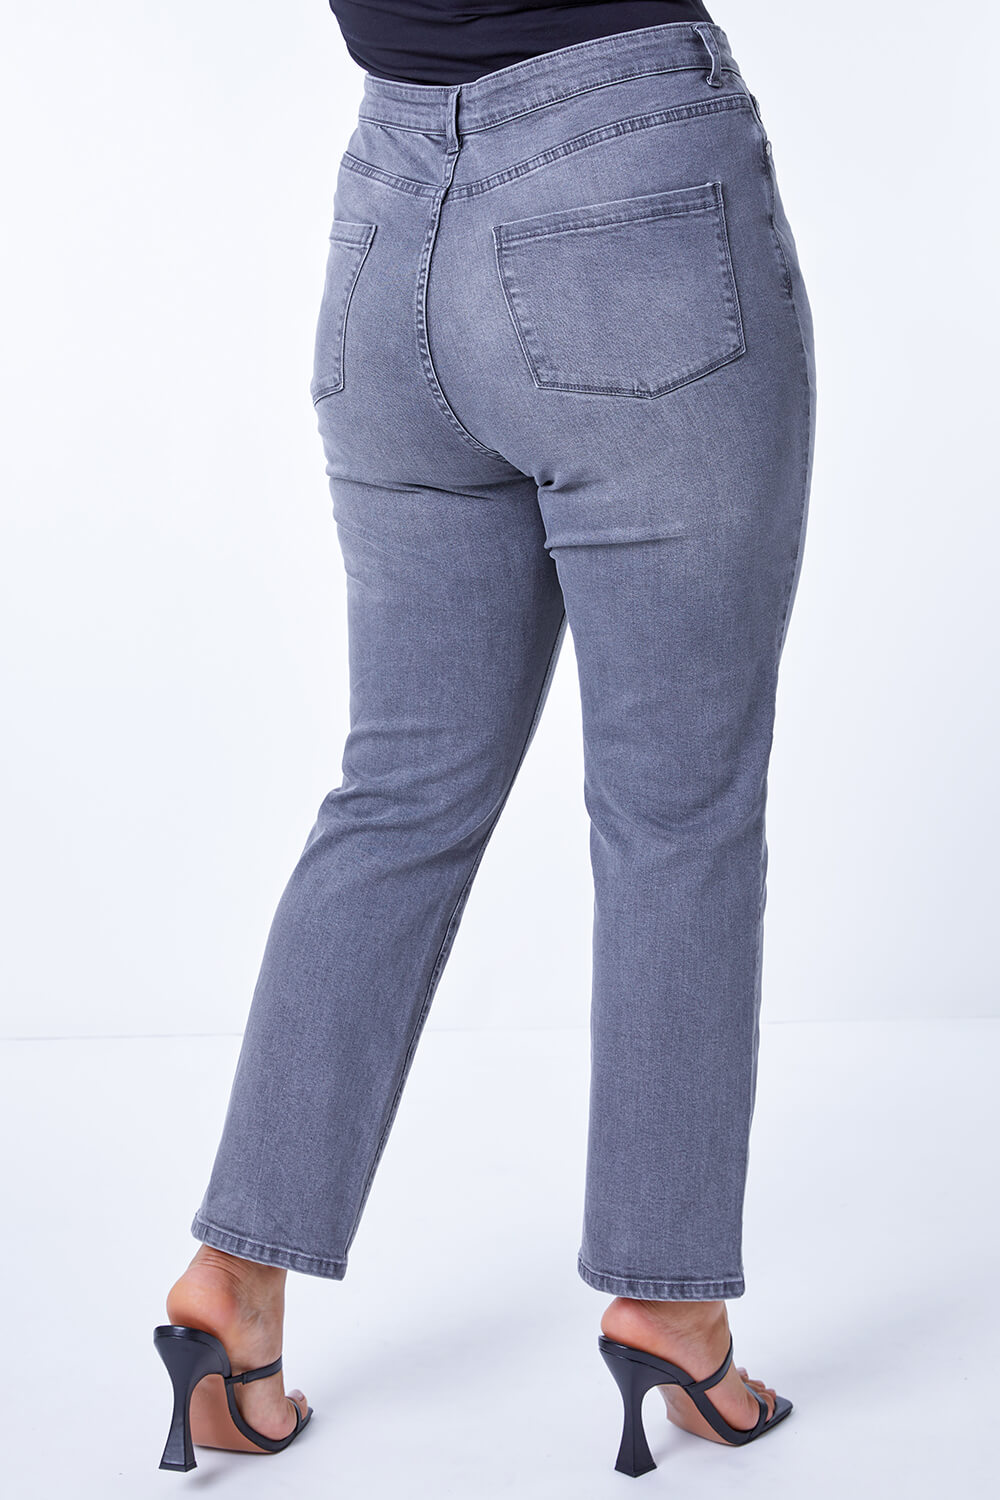 Grey Curve High Waisted Mom Jeans, Image 3 of 4